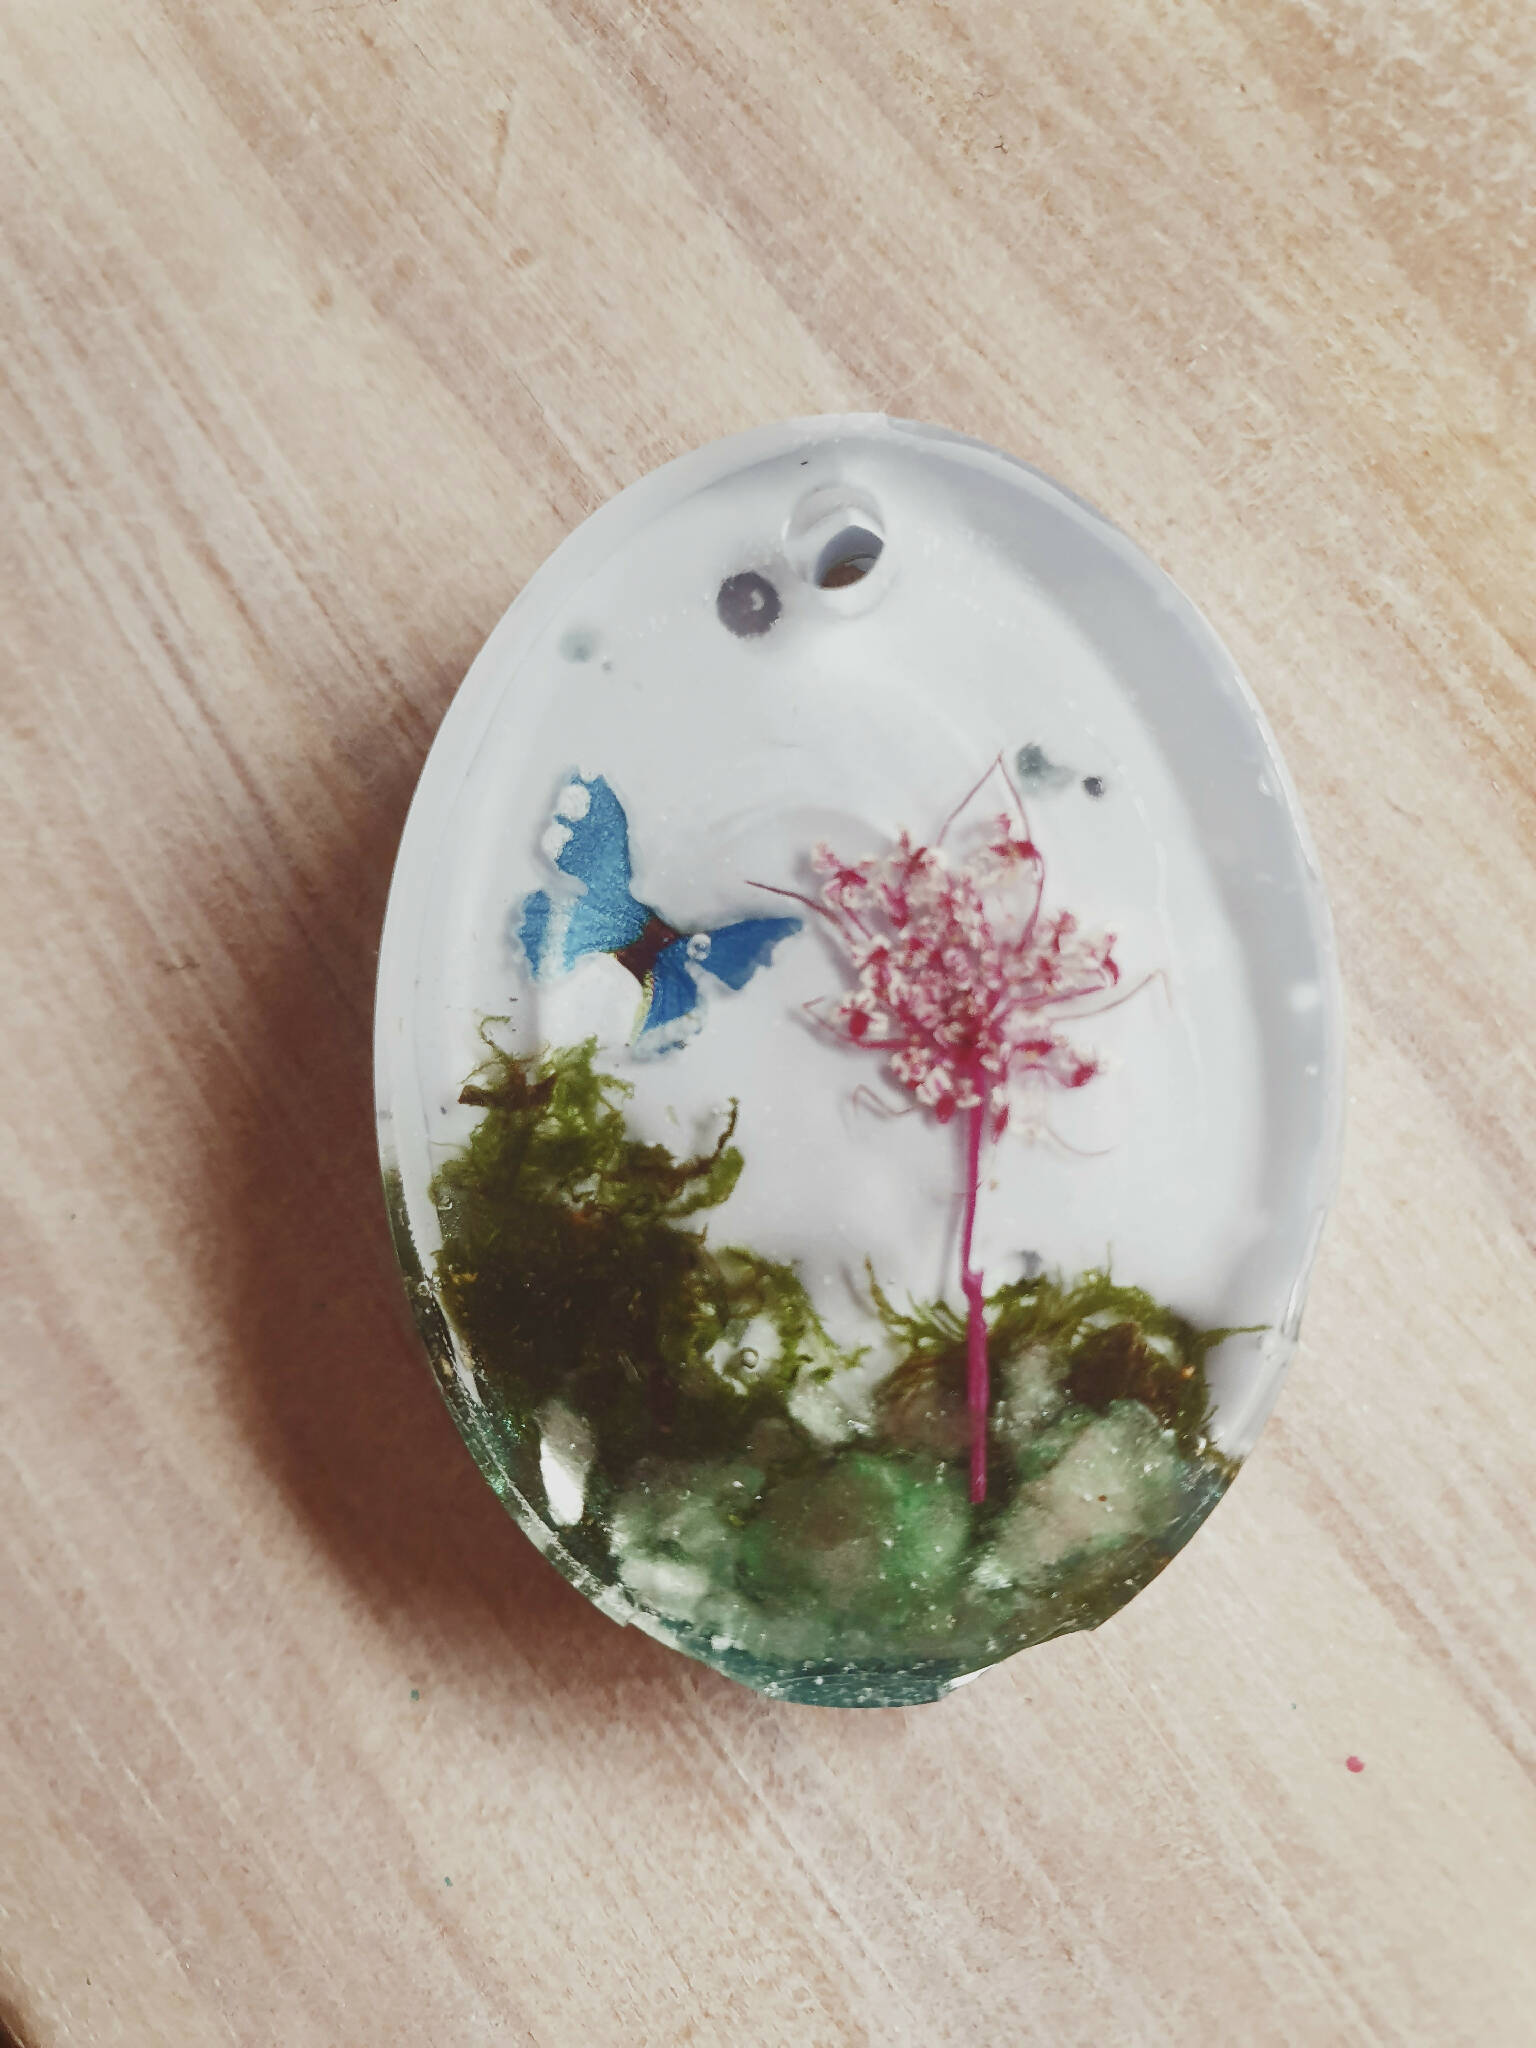 Ashes in resin pendants